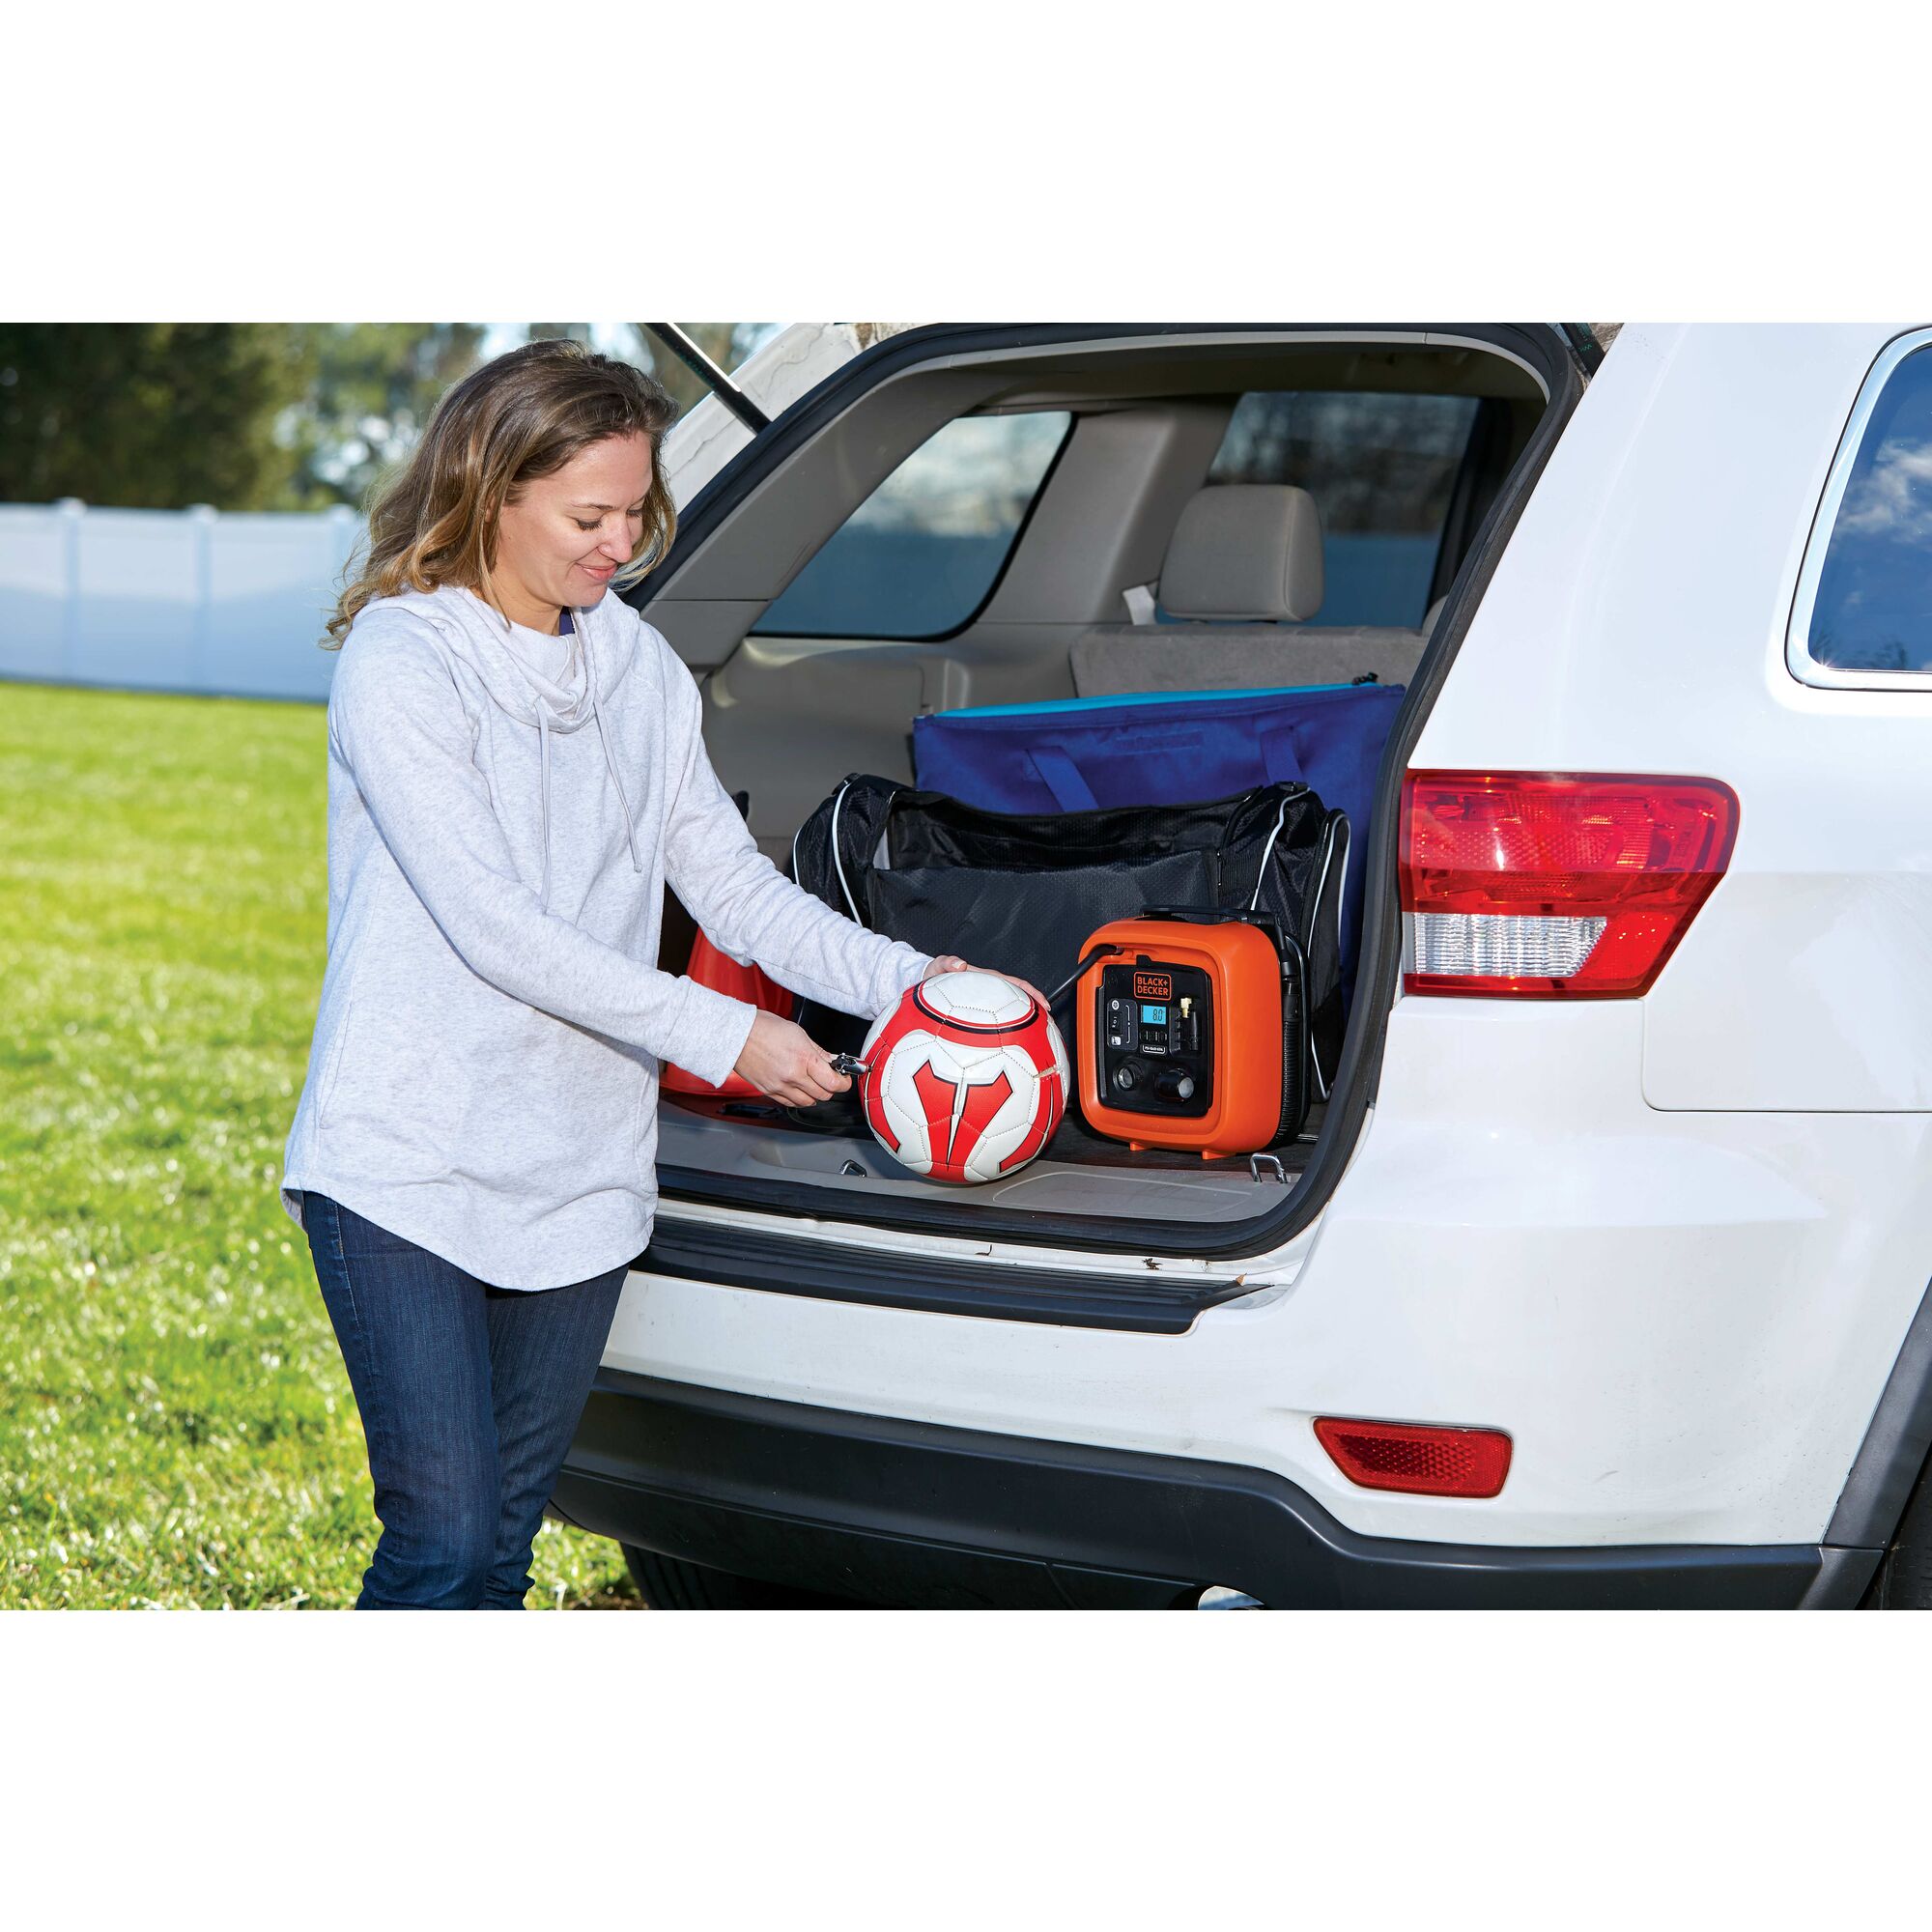 12 volt D C Multi Purpose Inflator placed in the back seat of S U V being used by person to inflate soccer ball.